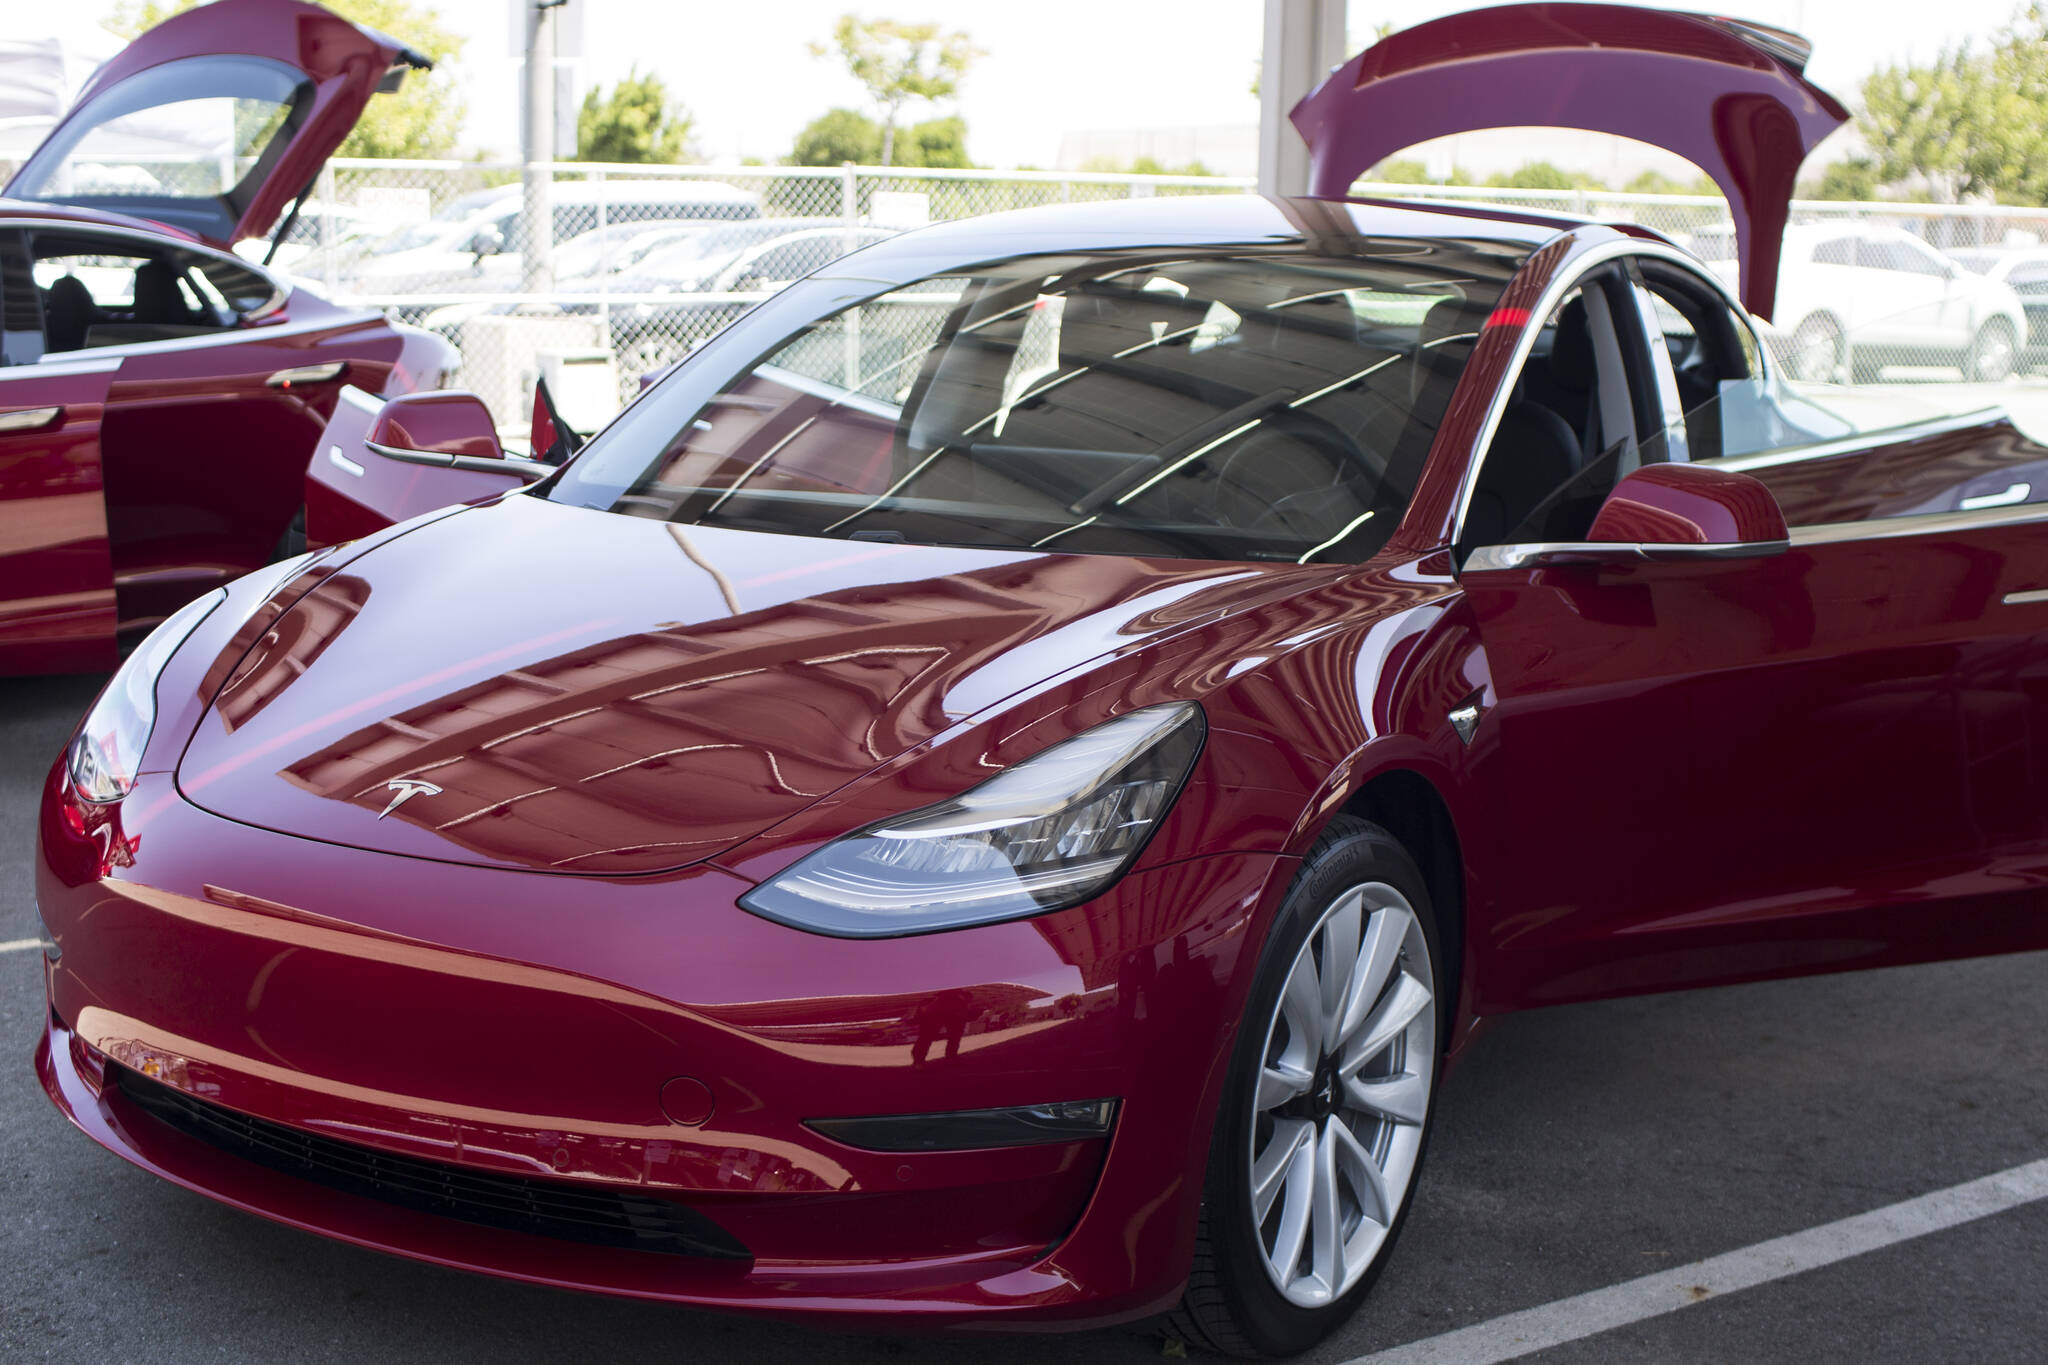 A Tesla electric vehicle owner went to court after it was damaged. Bloomberg photo by Dania Maxwell